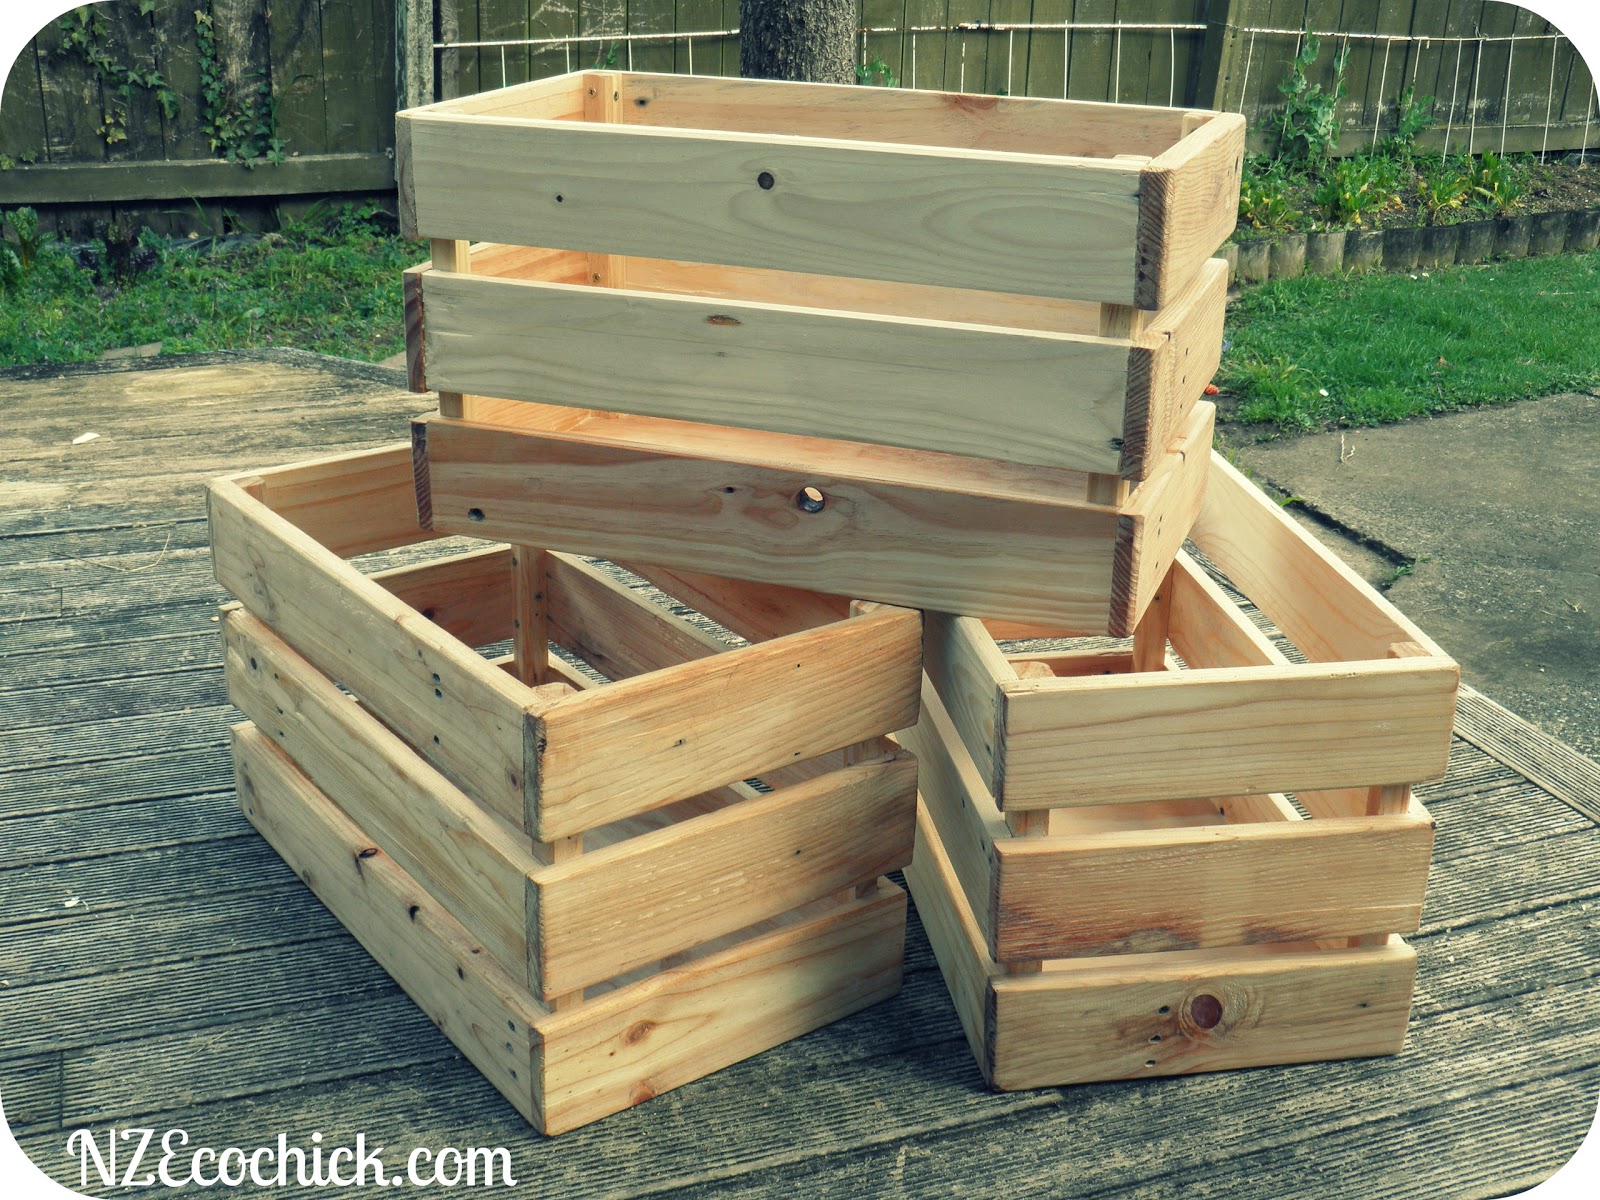 Pallet Wood Made Out of Crates